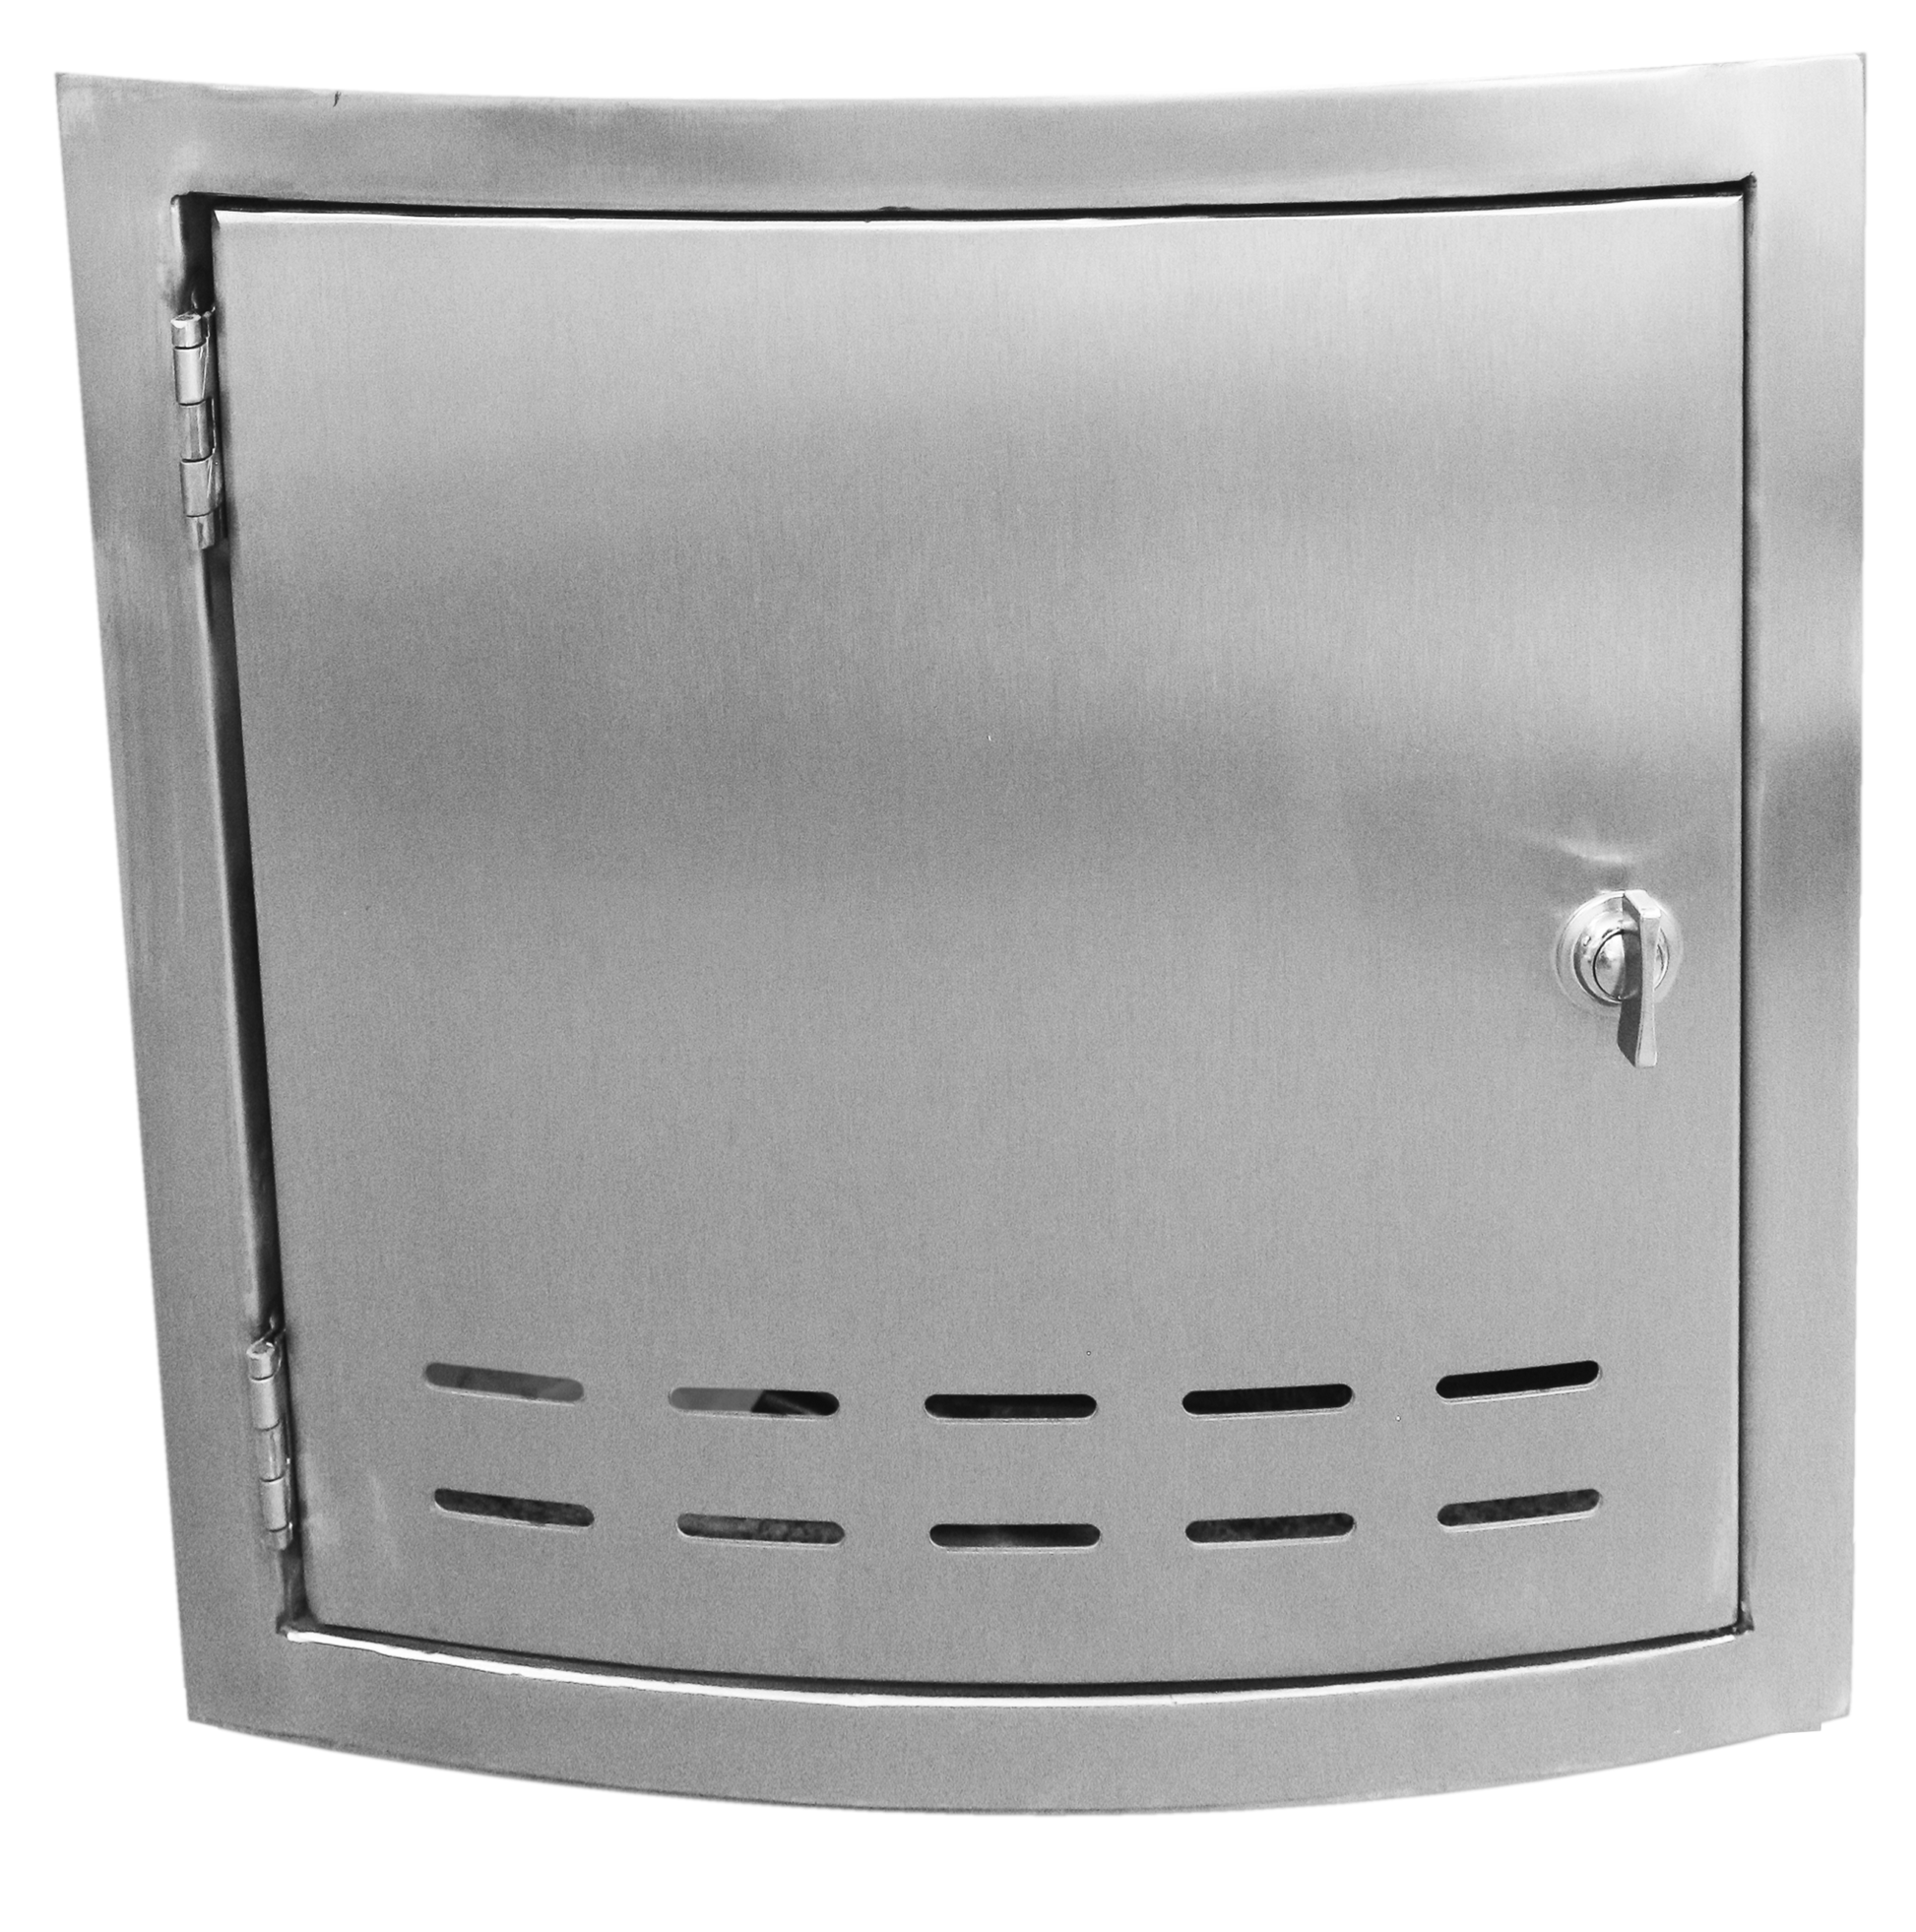 The Outdoor Plus 10" x 10" Stainless Steel Access Door for 20lb. Propane Tank